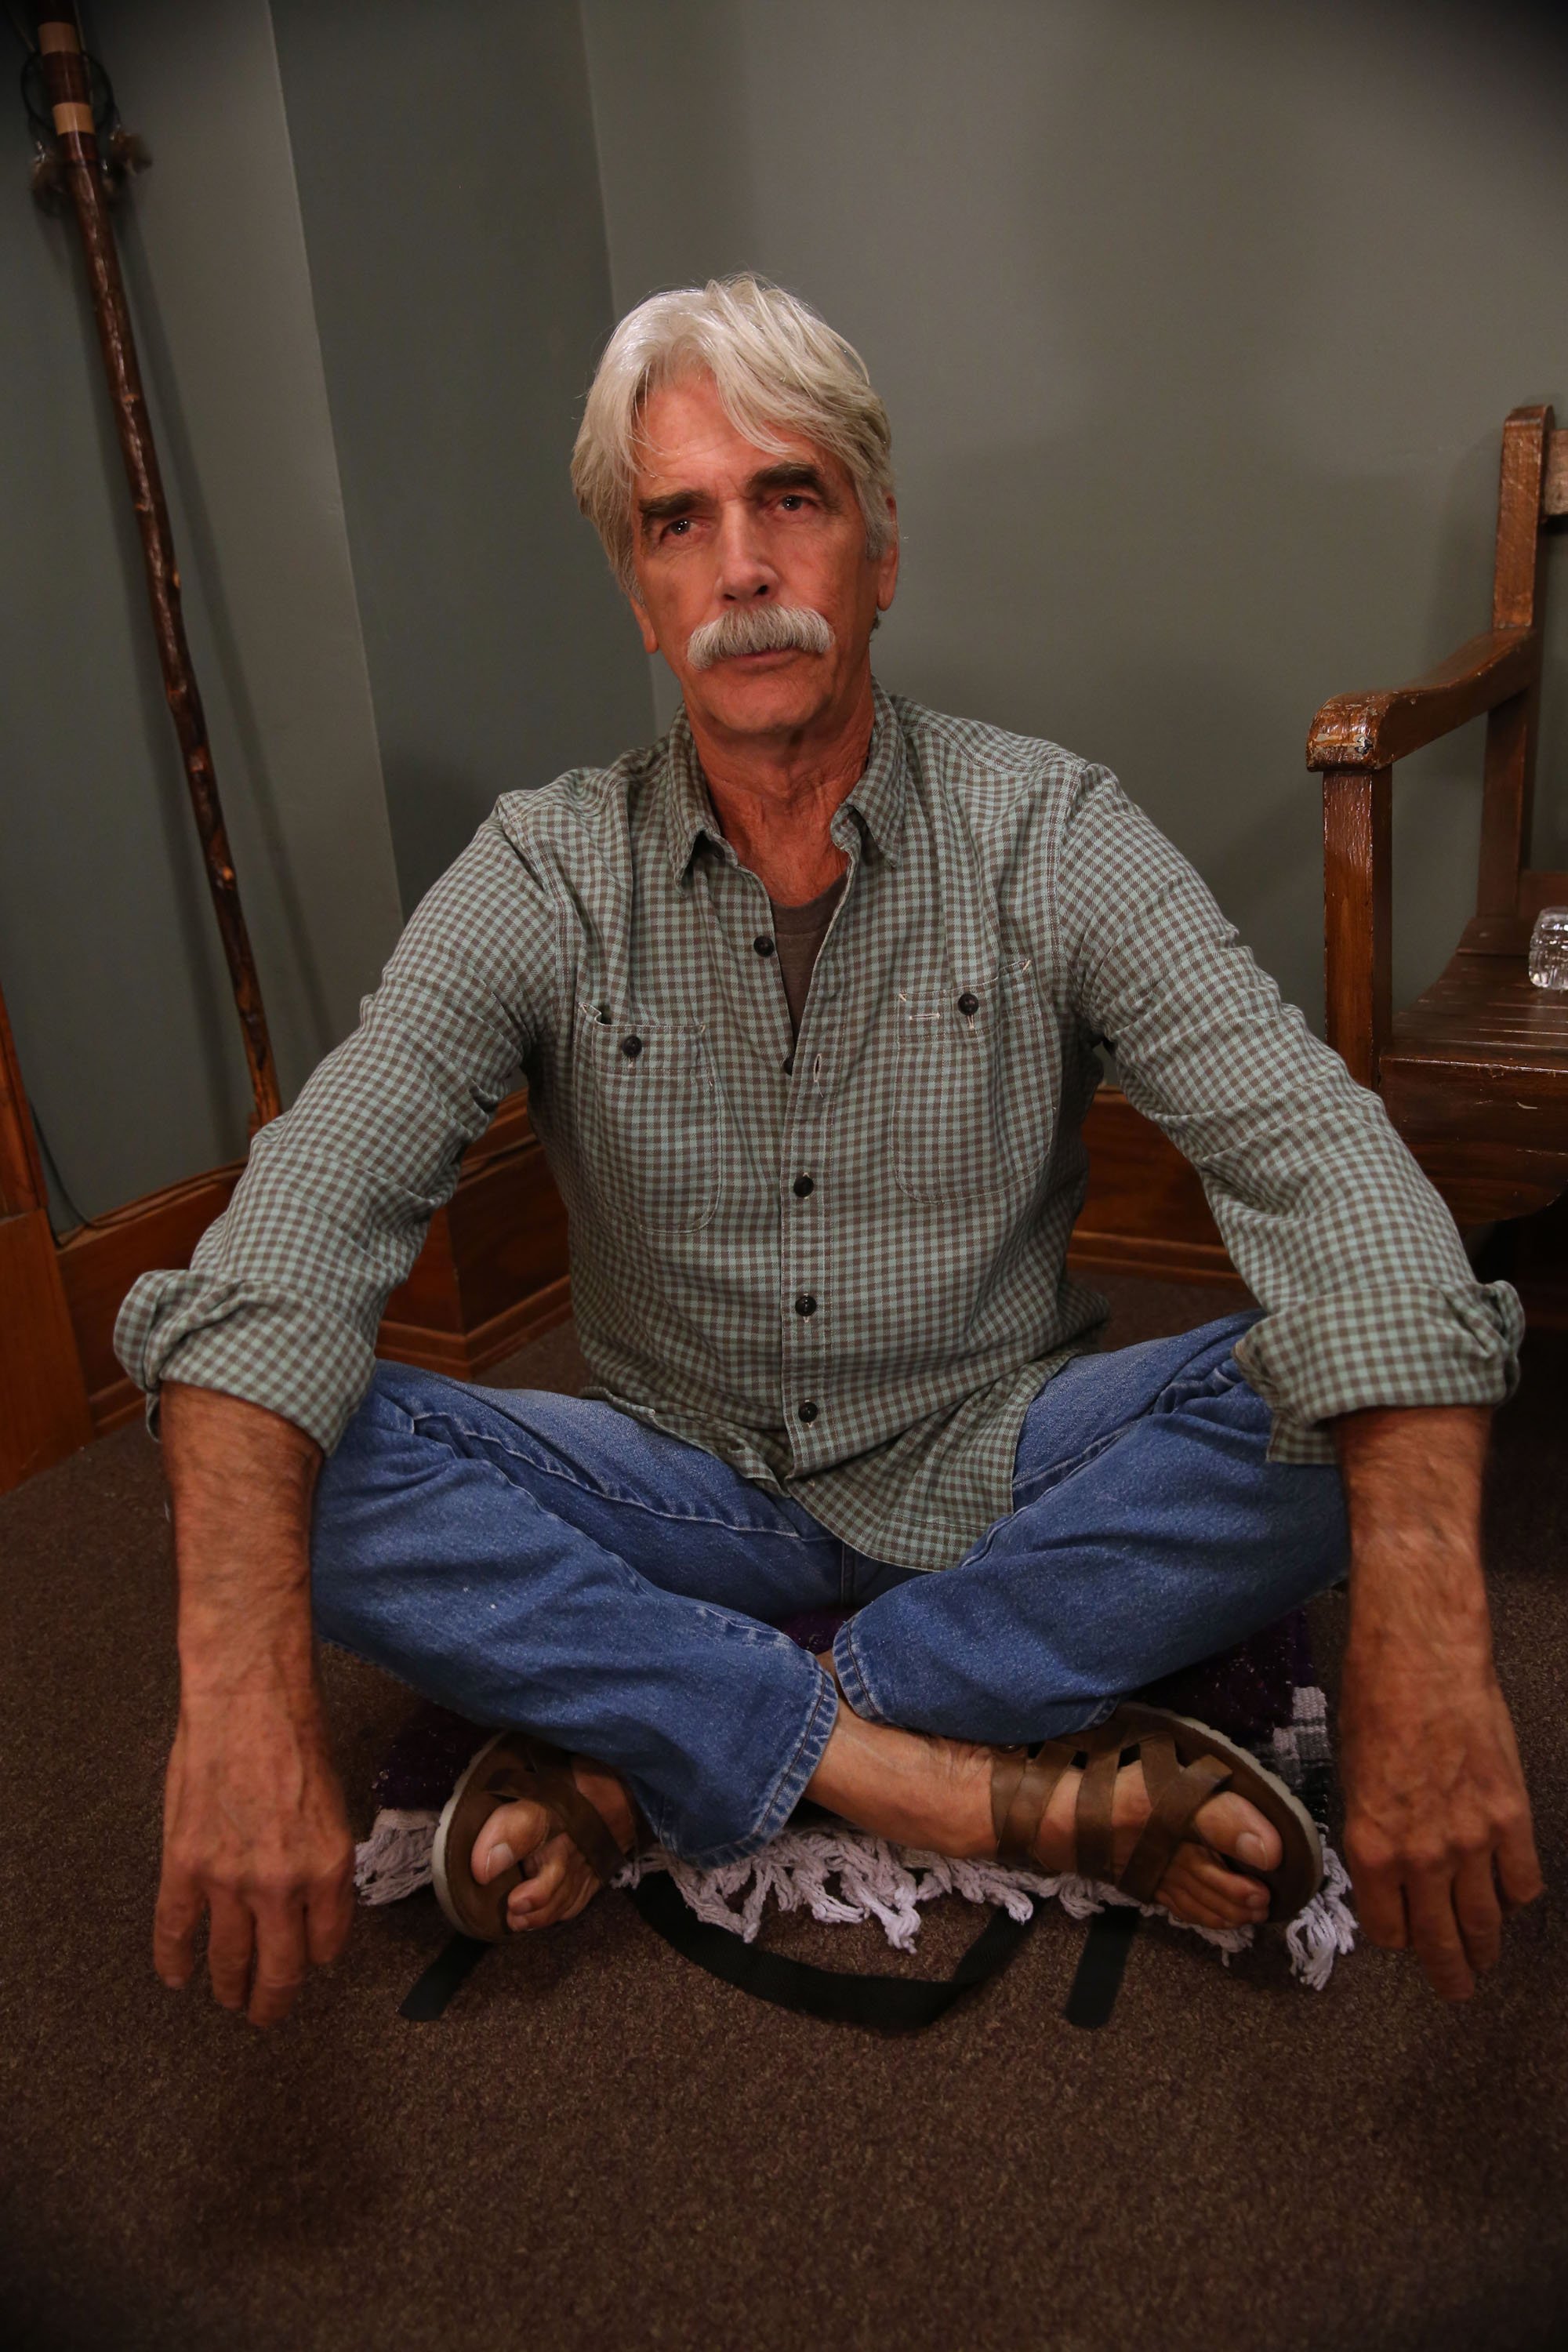 Sam Elliot as Eagleton Ron on Season 6 of "Parks and Recreation" on August 22, 2013 | Source: Getty Images